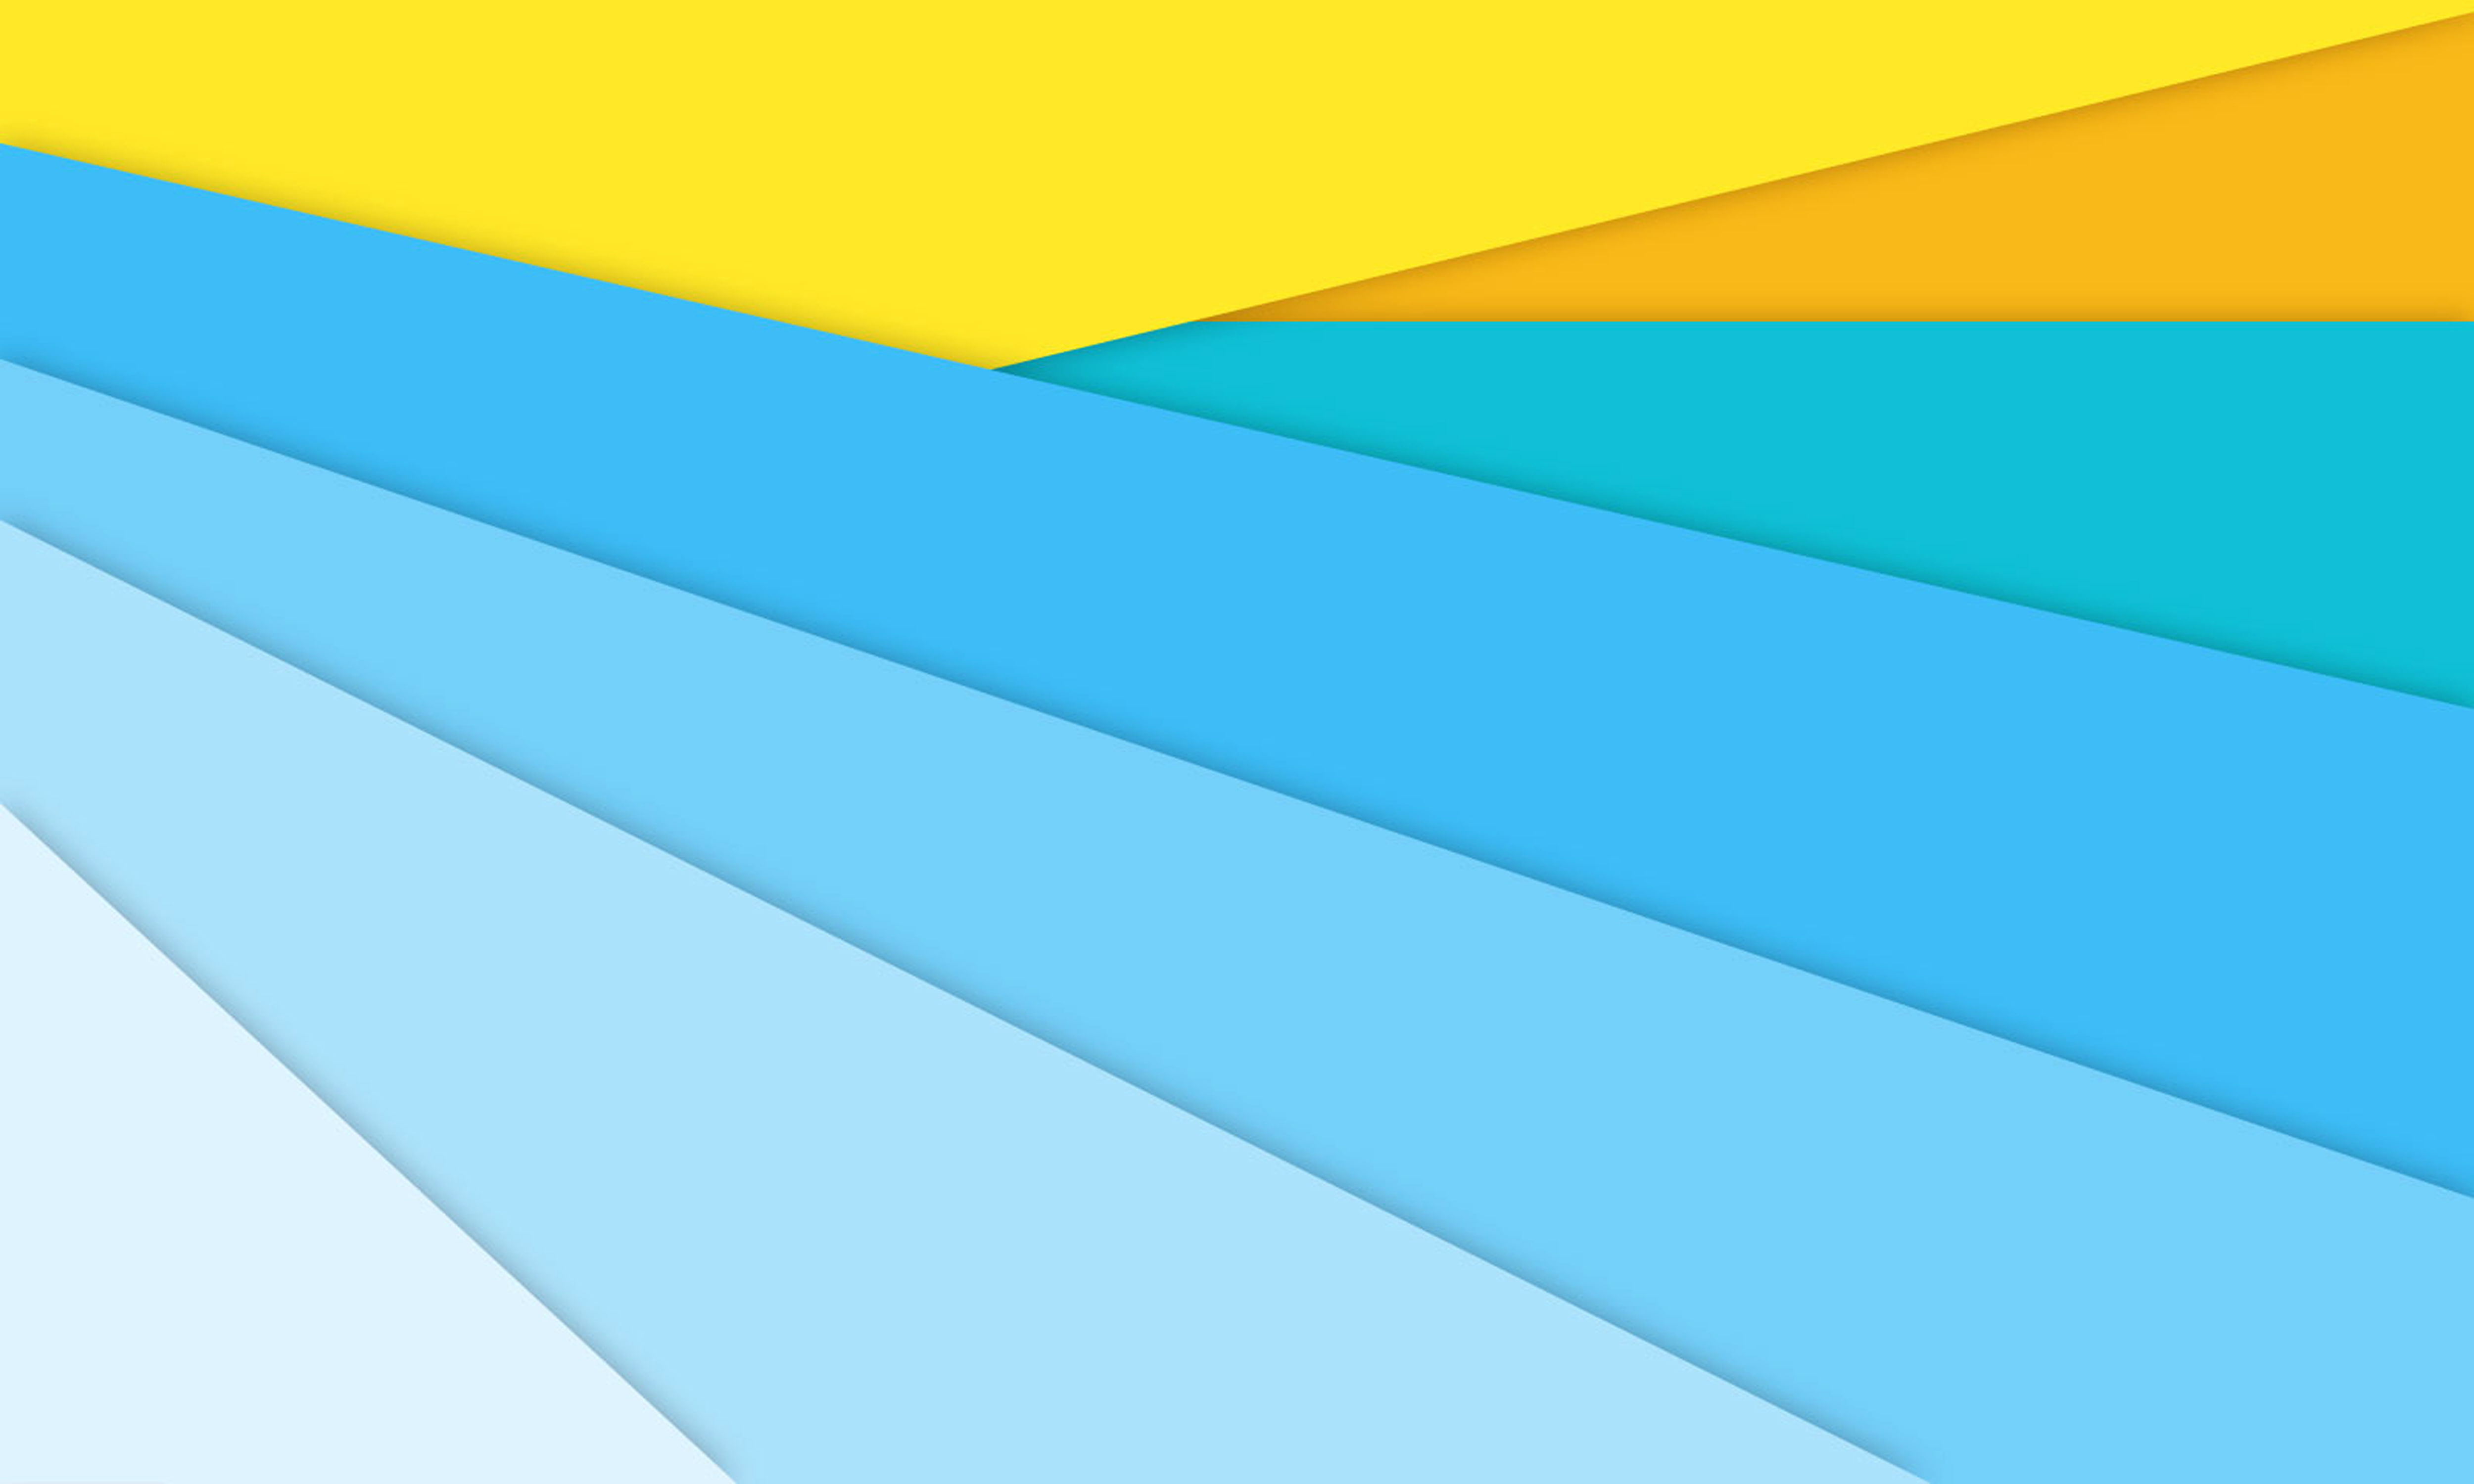 4K, Material Design, Stock, Android, backgrounds, blue, pattern